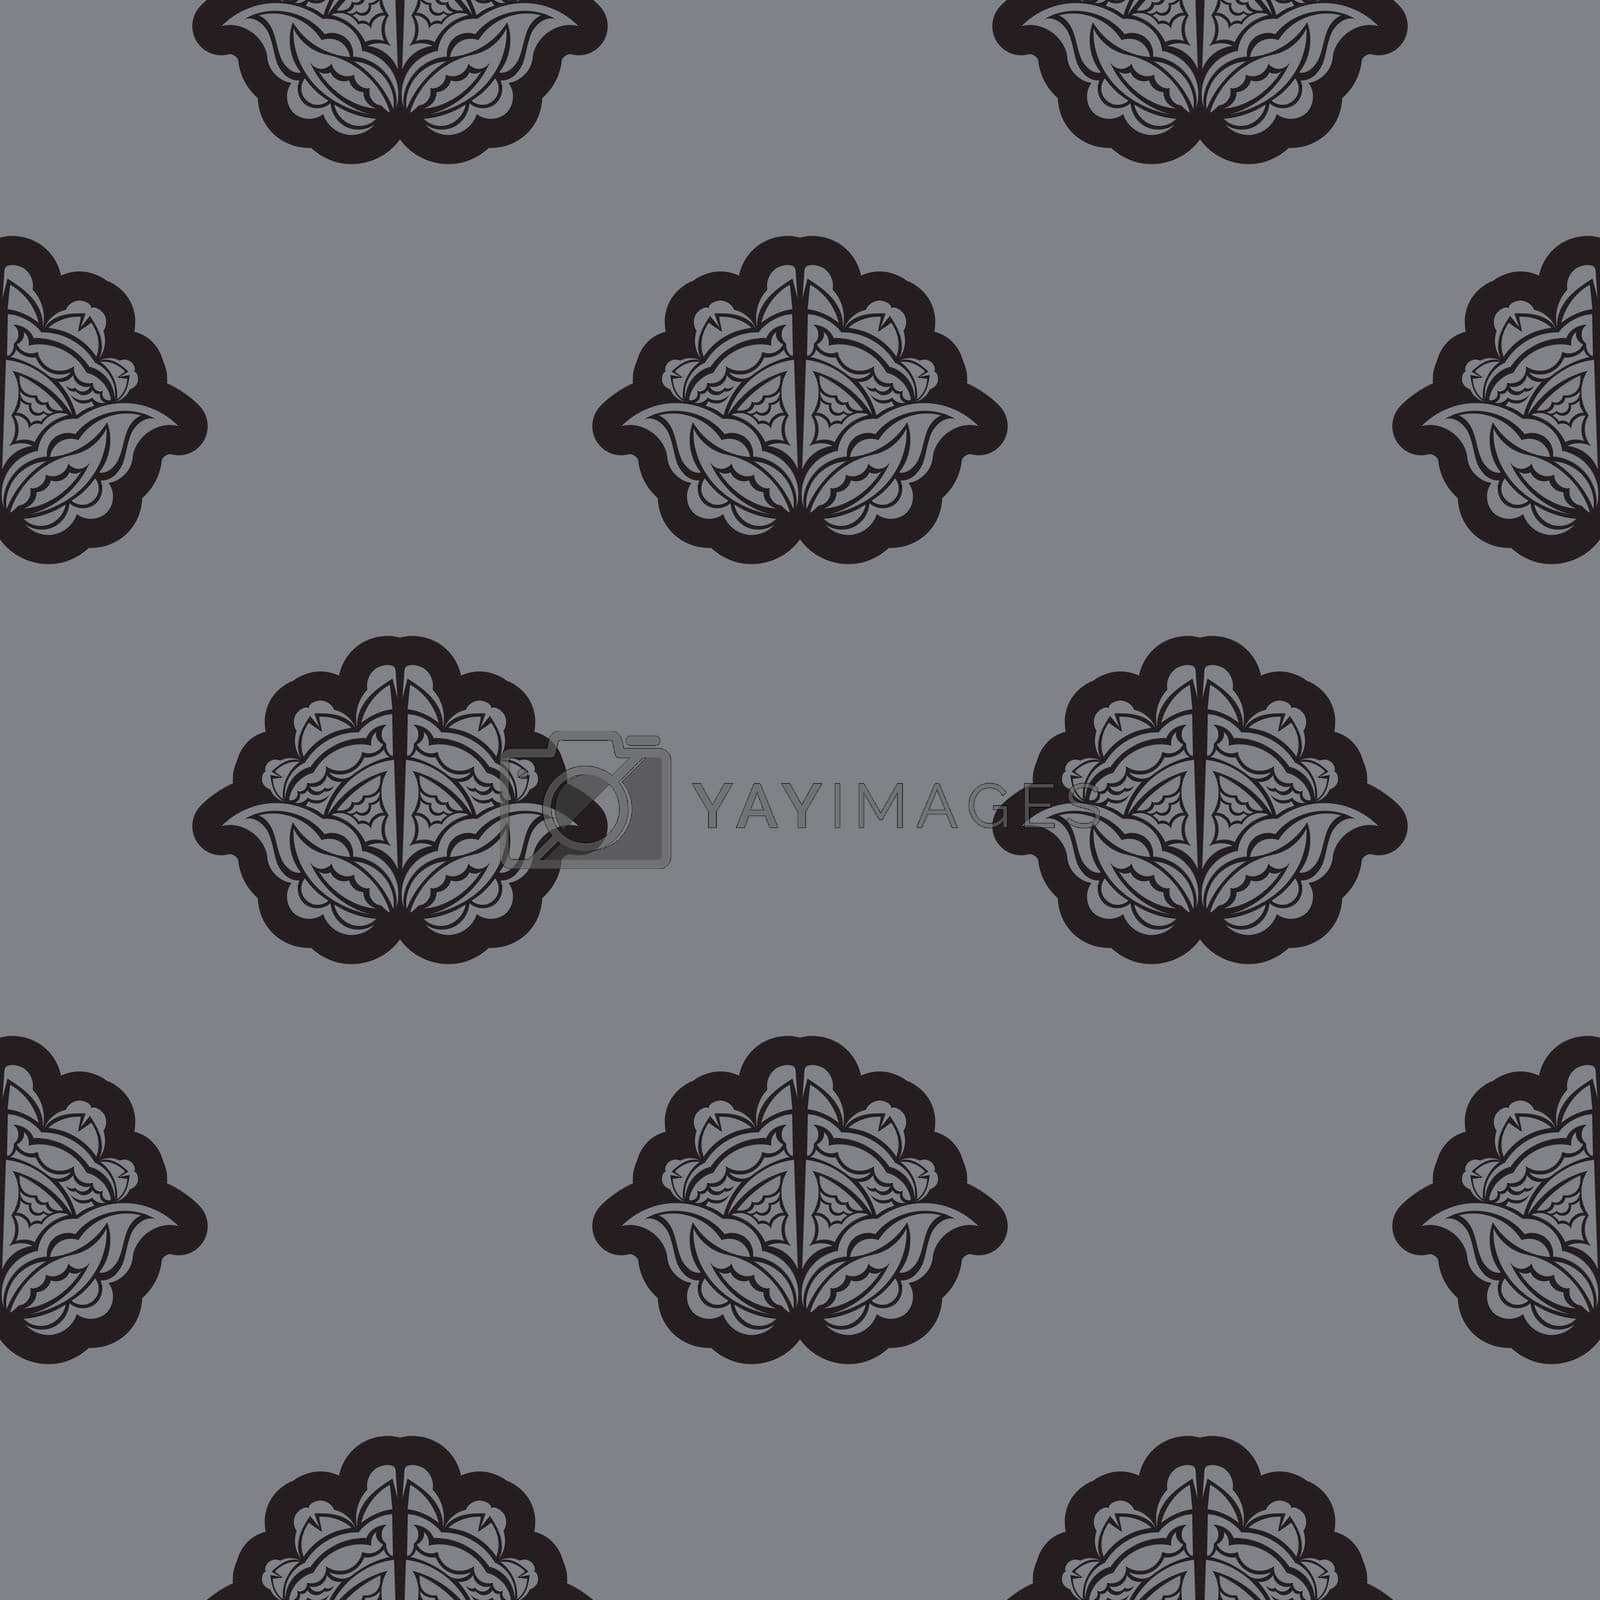 Seamless pattern with antique style ornament. Good for garments, textiles, backgrounds and prints. Vector illustration.